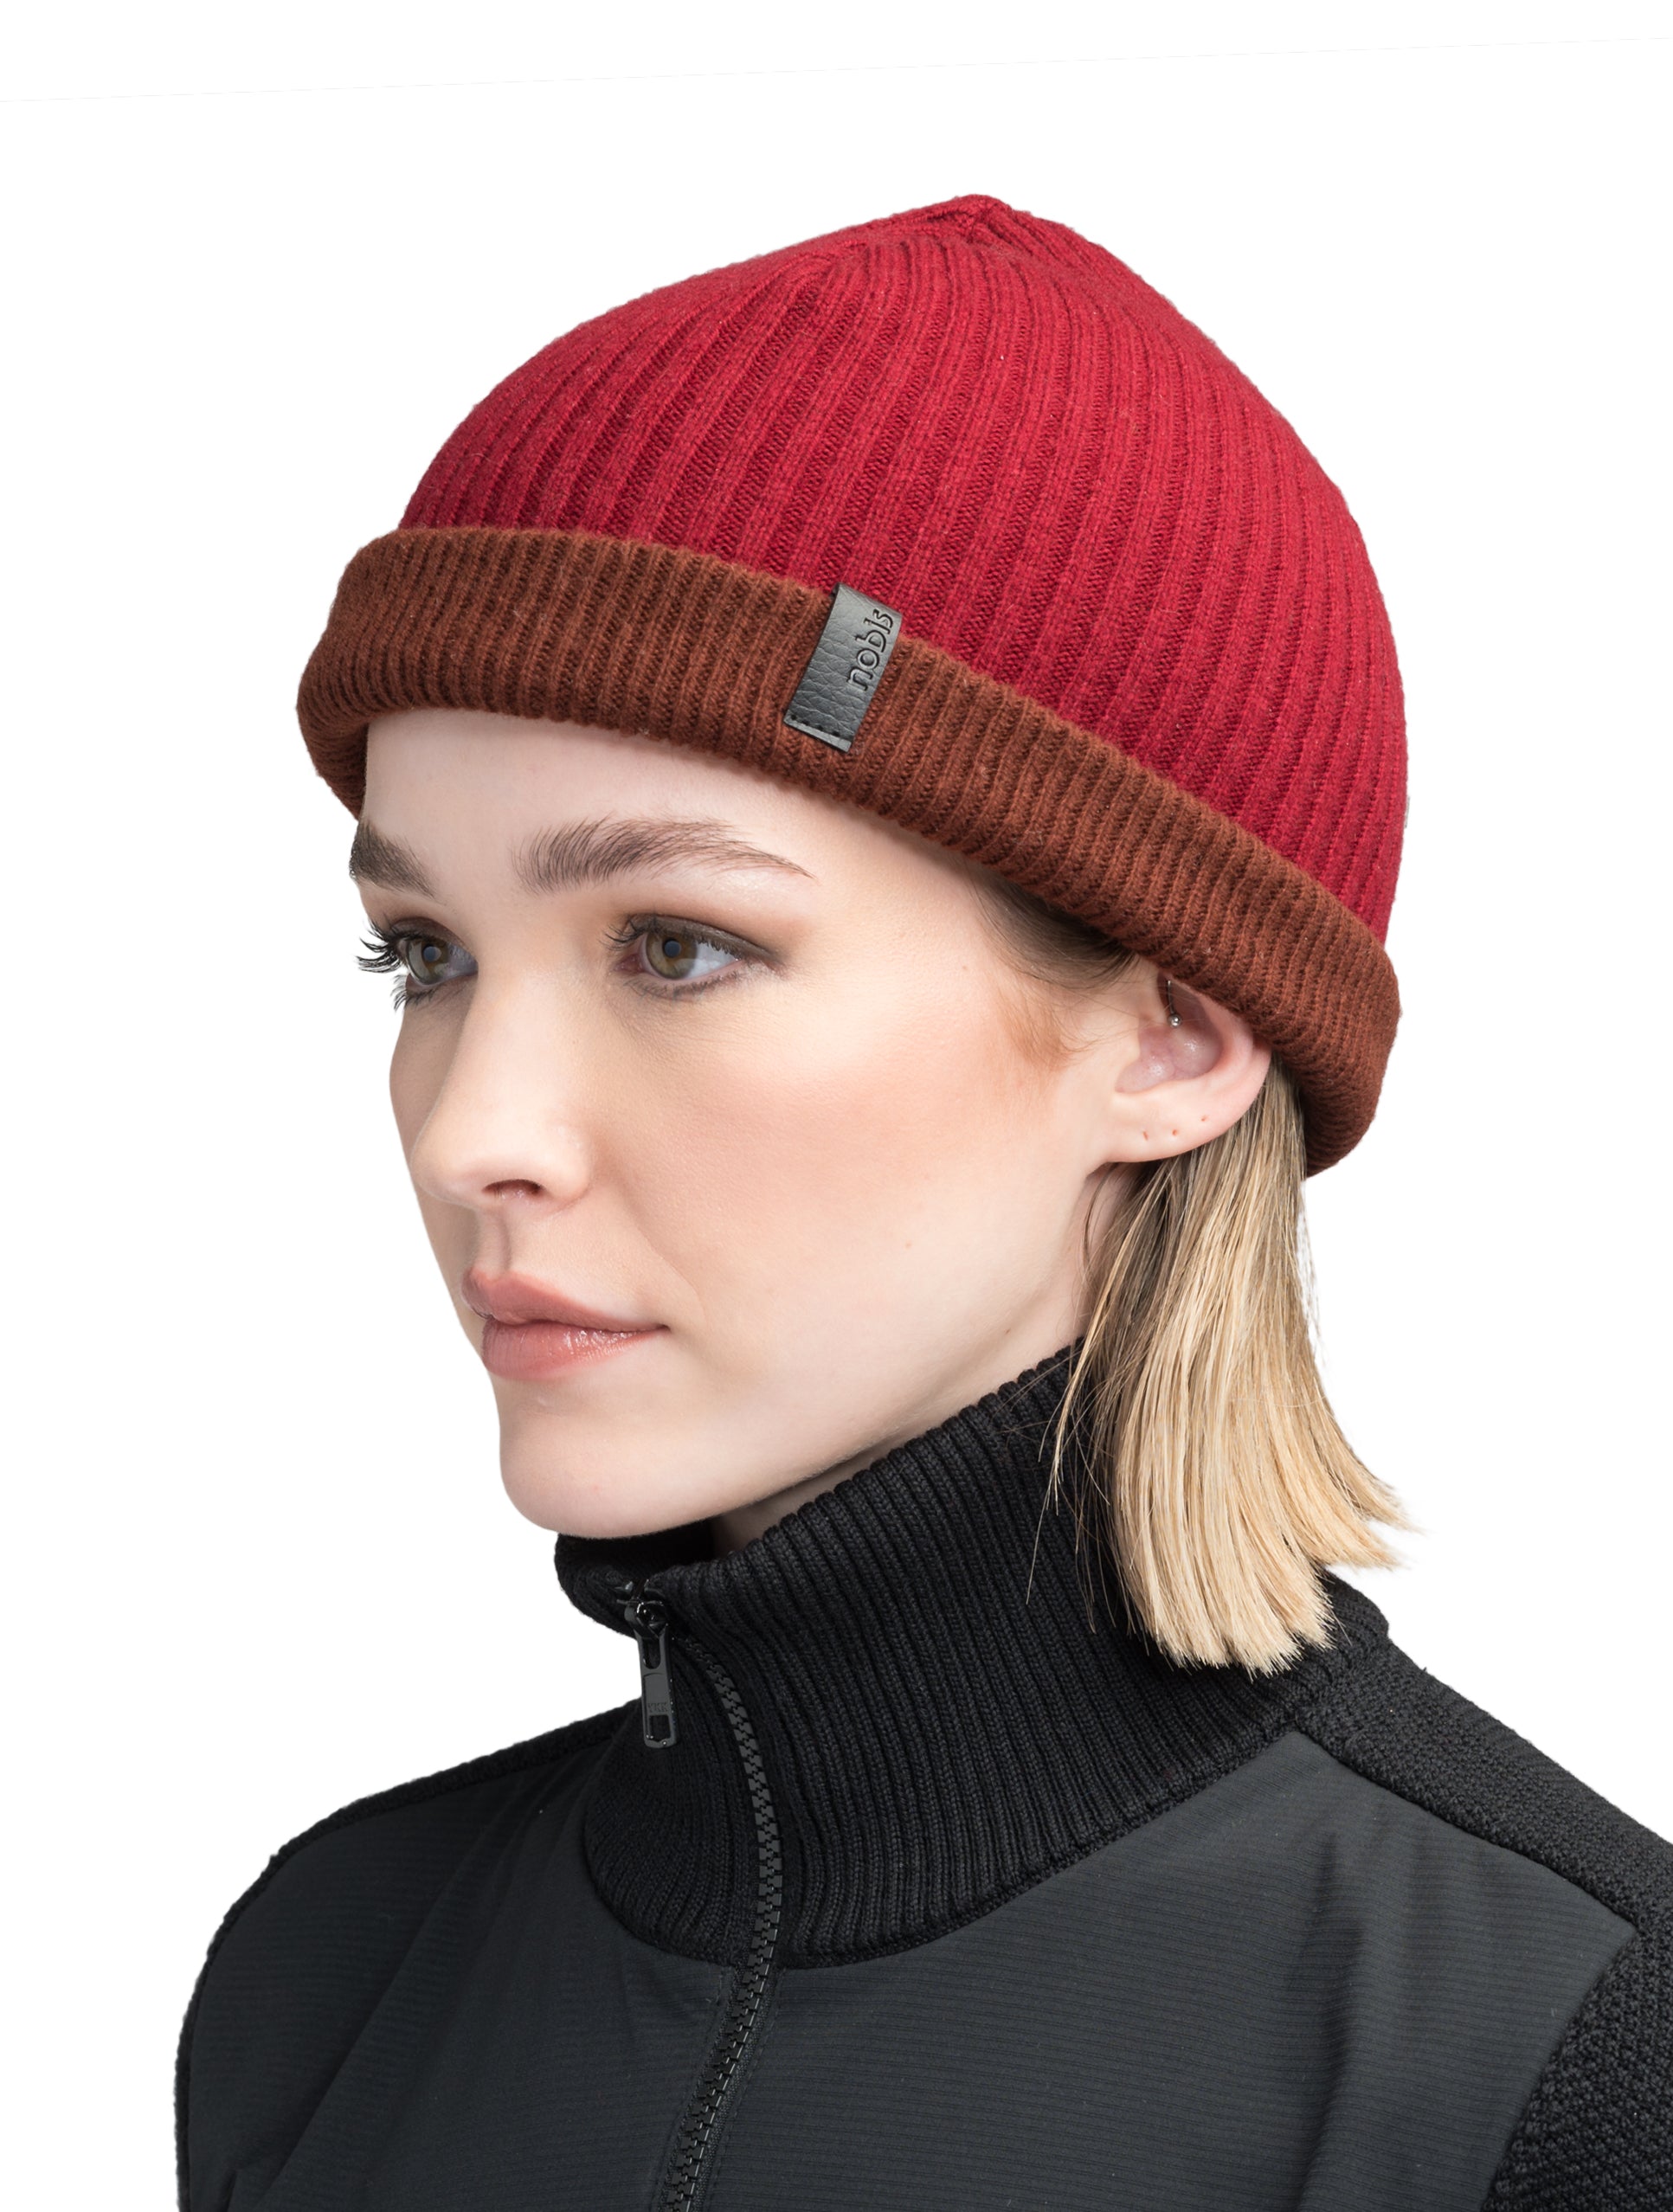 Ardn Unisex Tailored Reversible Knit Beanie in an extra fine merino wool blend, fitted rib knit, and reversible design, in Potent Purple/Rio Red